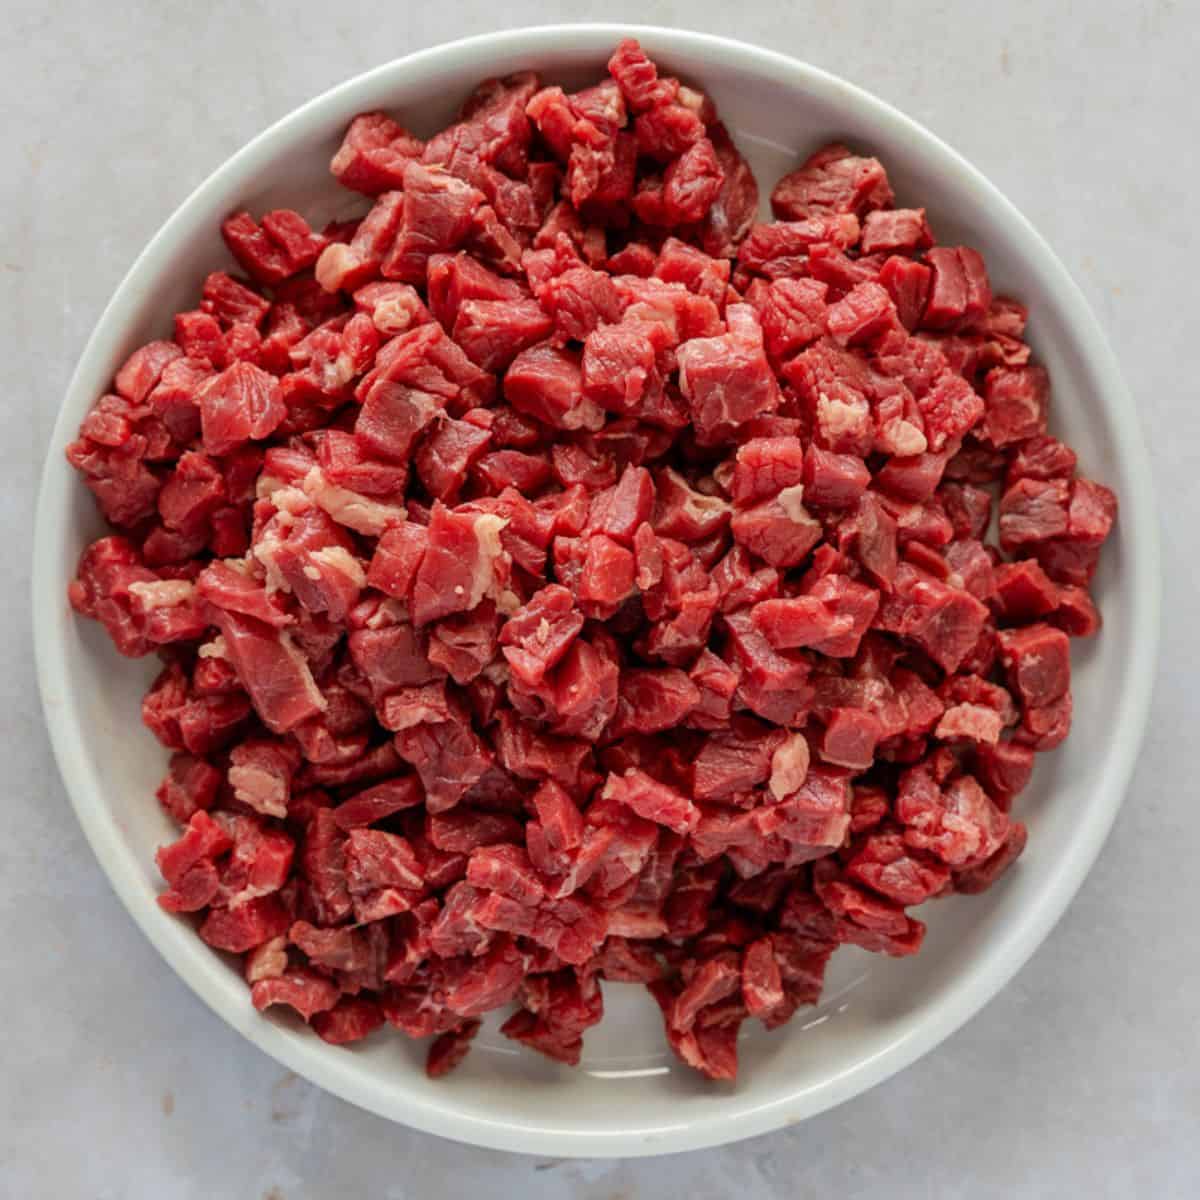 Uncooked diced beef on a round white plate.